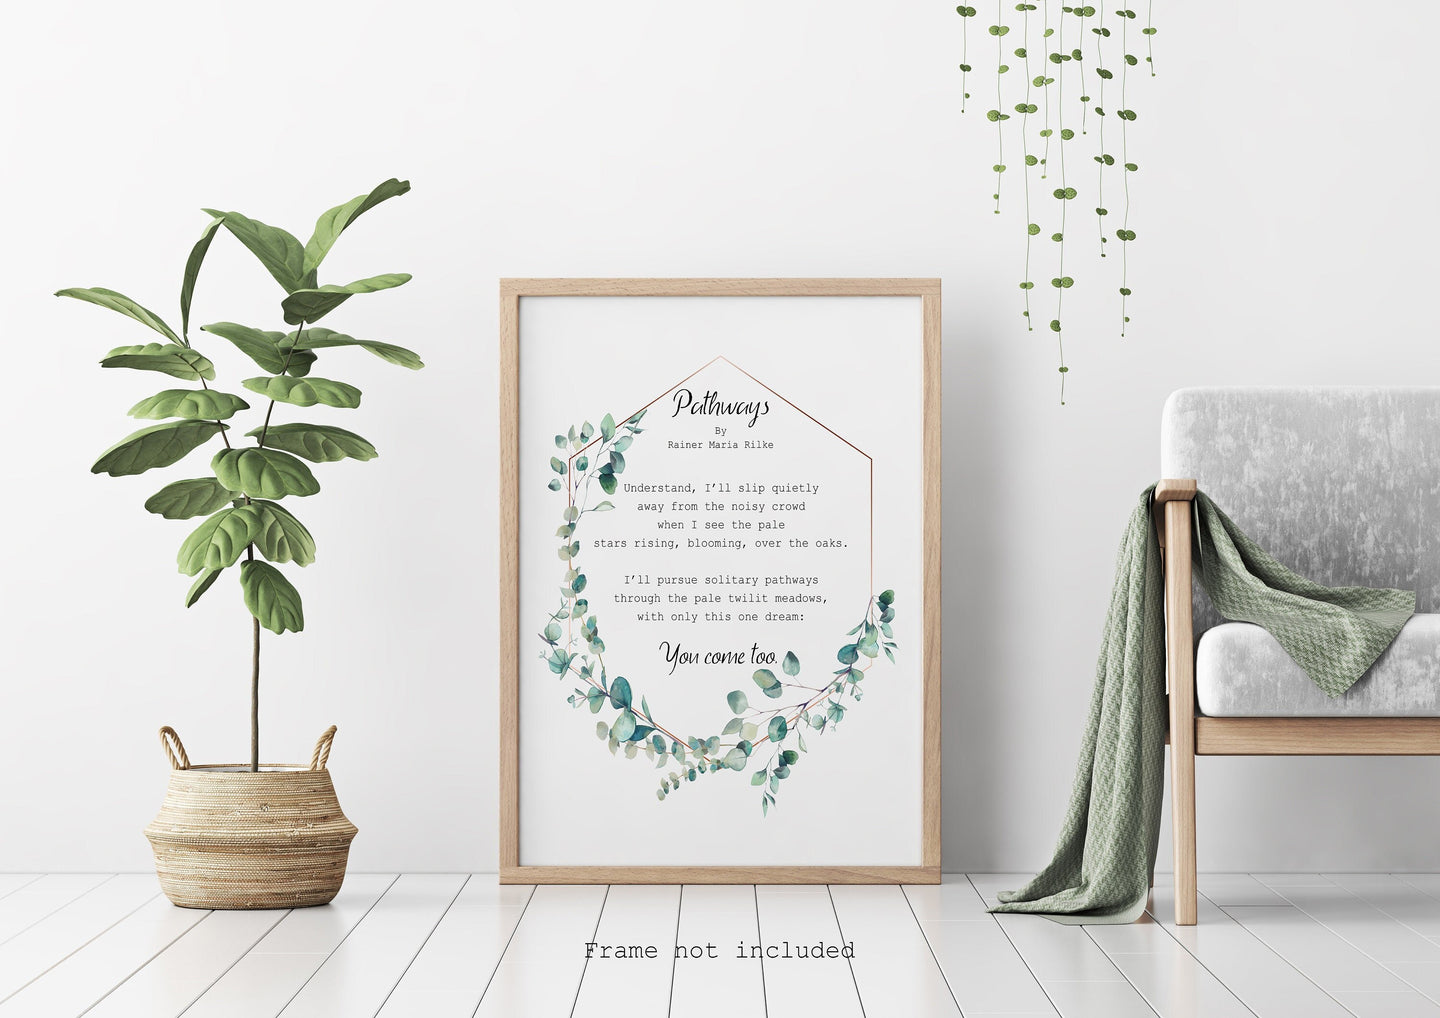 Rainer Maria Rilke Poem - Pathways - You come too - Poetry Art Print - Physical Art Print Without Frame